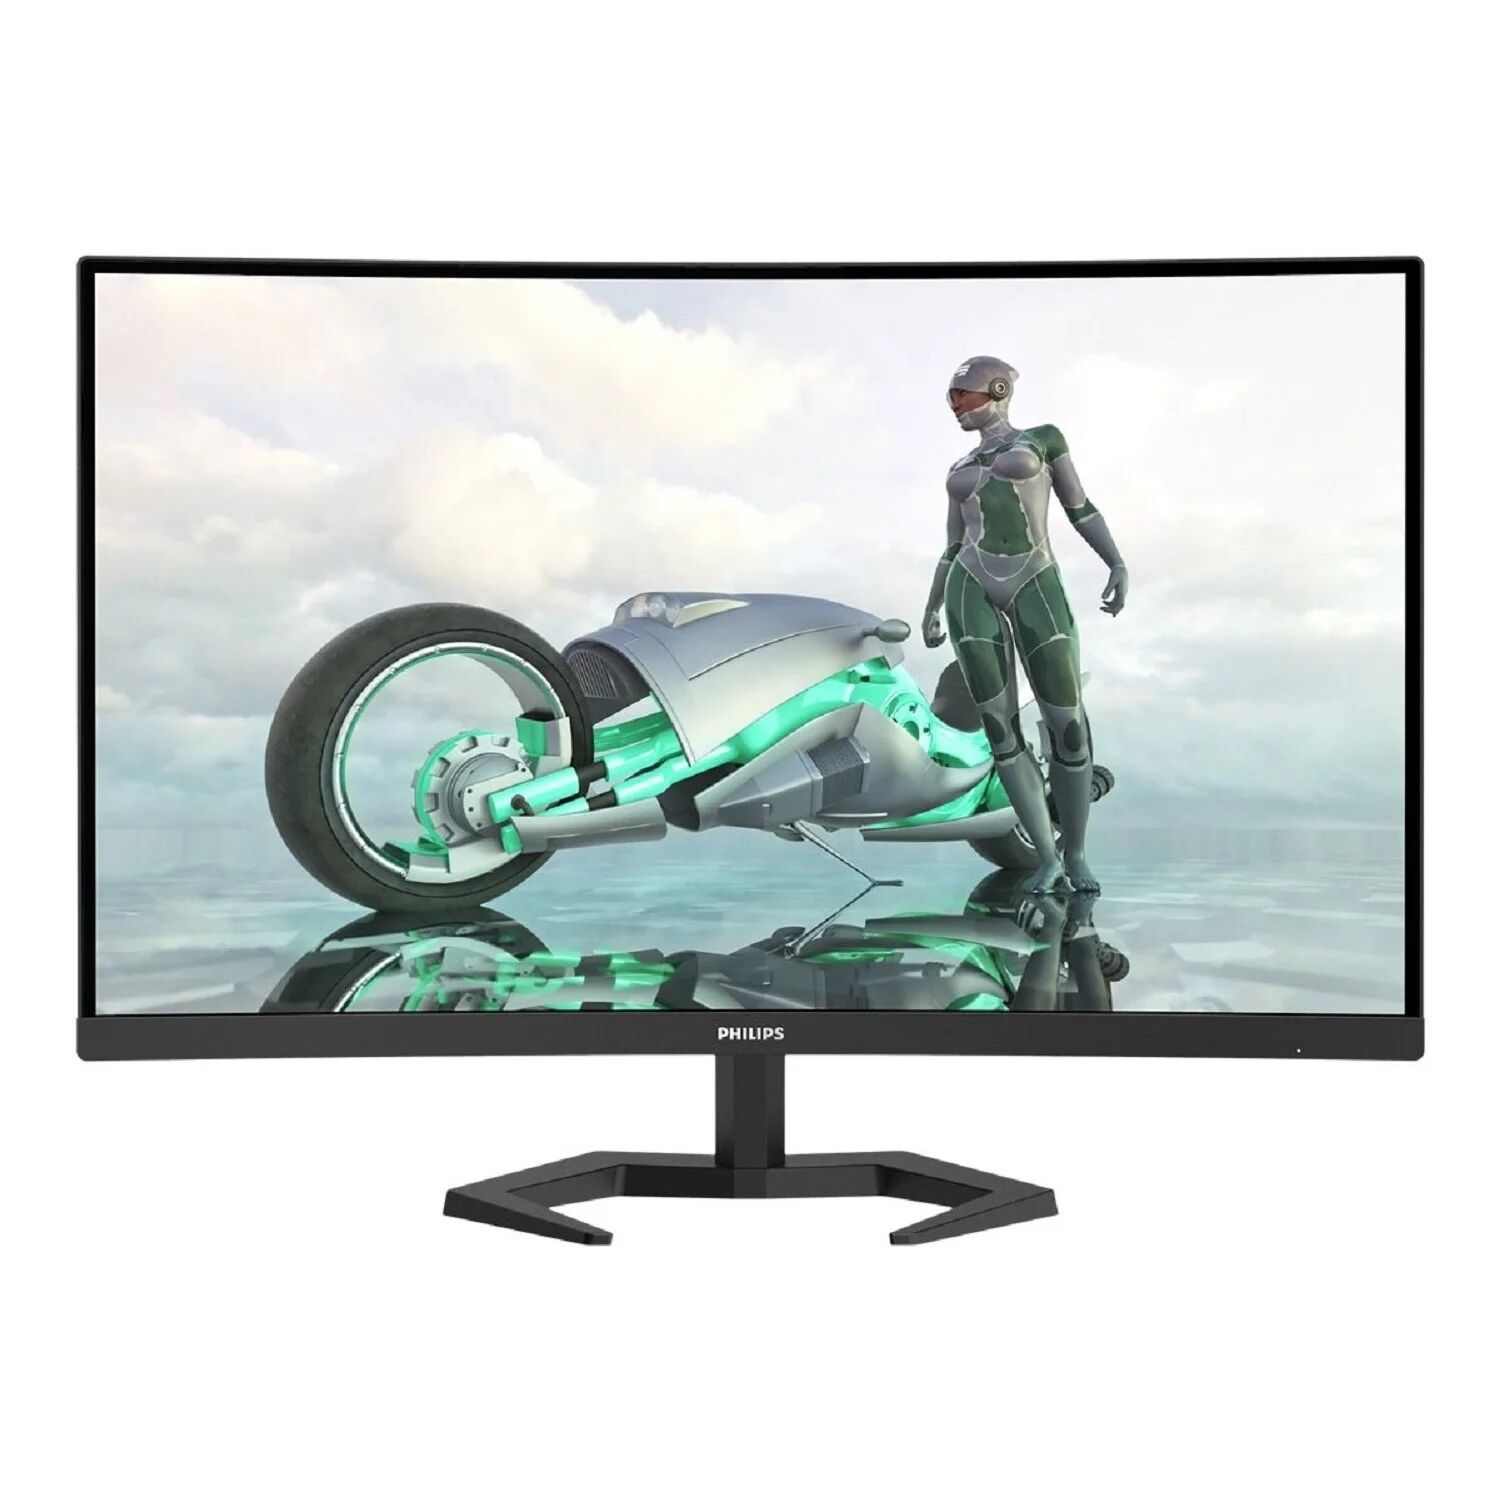 Philips Evnia Curved Gaming Monitor 27 Inch Full HD 165Hz 27M1C3200VL